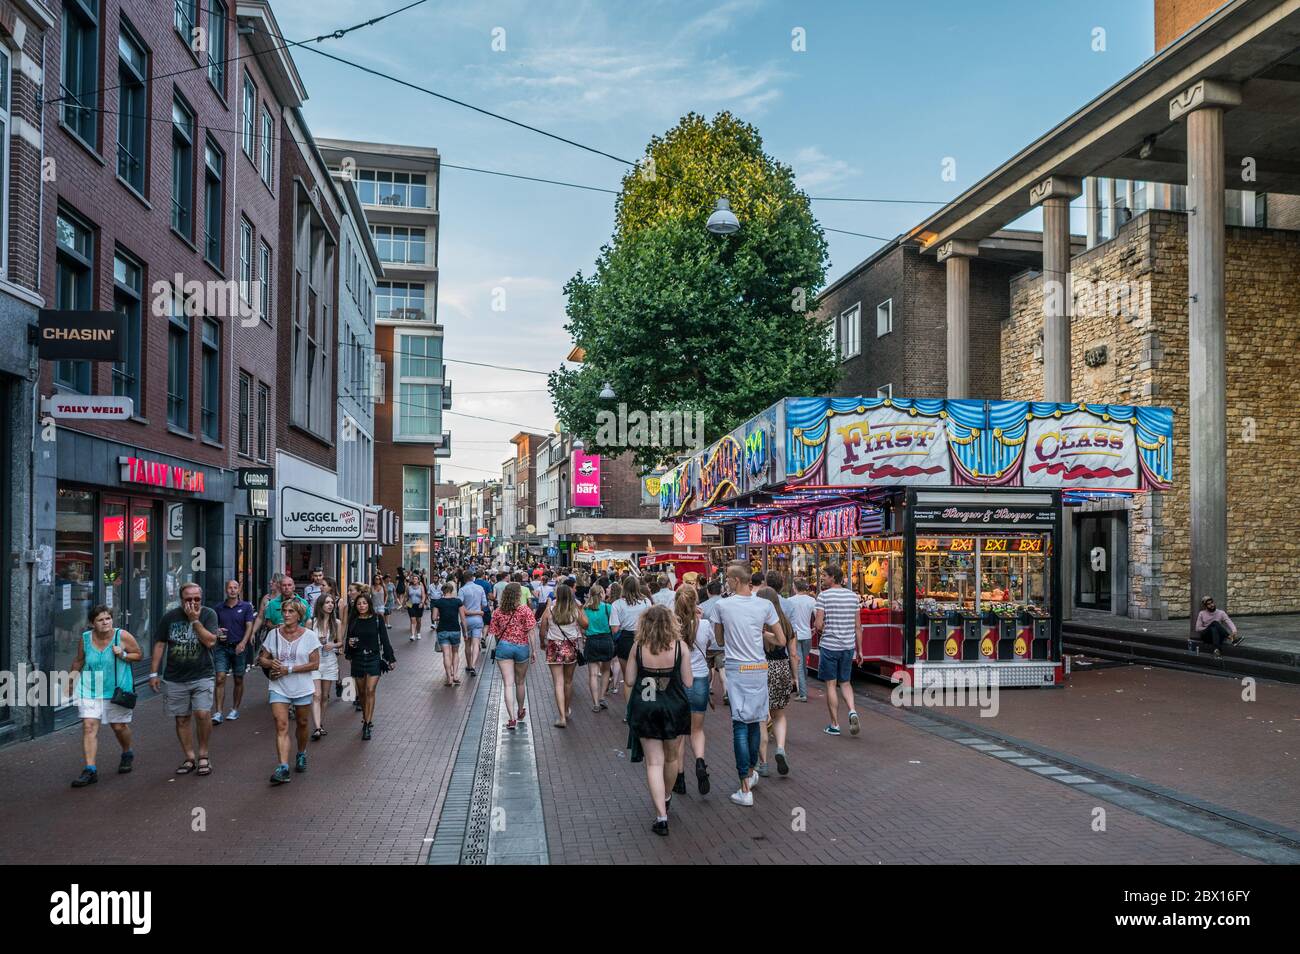 Nijmegen, The Netherlands 16th July 2018 - People entering the city to visit the 4Days festival in the city center Stock Photo